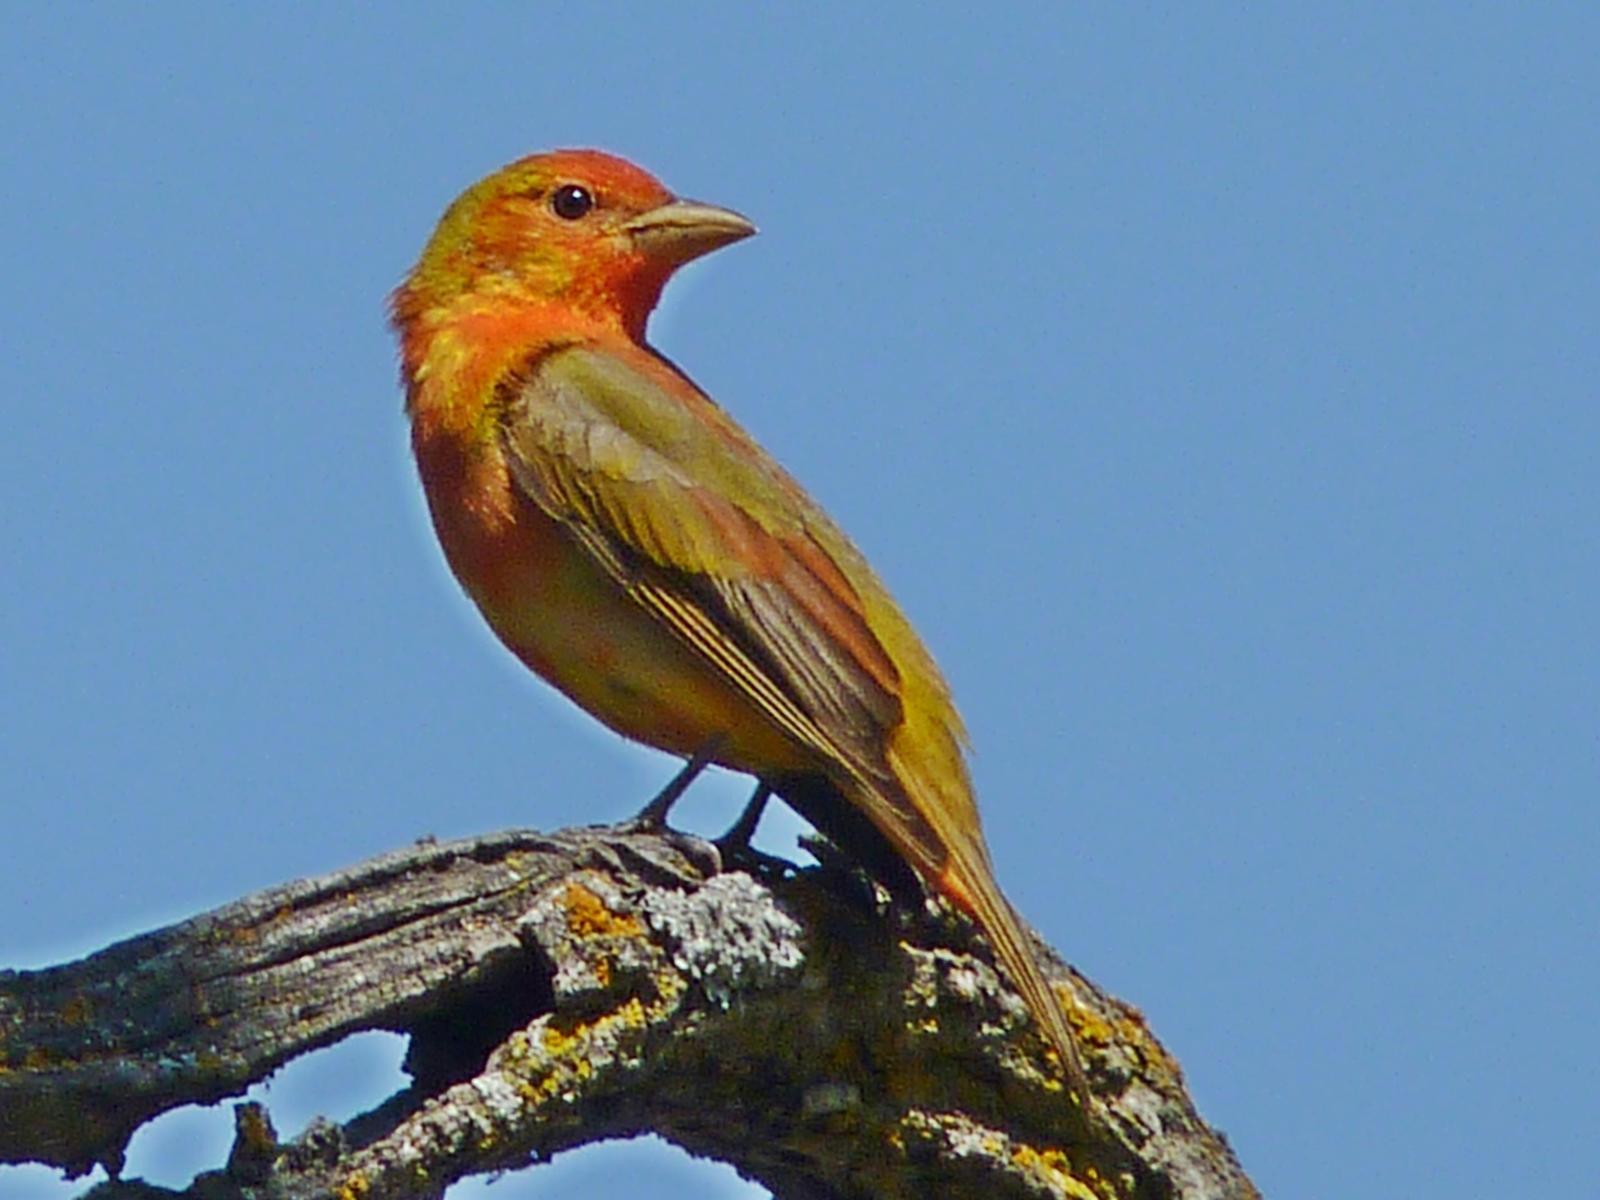 Summer Tanager Photo by Bob Neugebauer